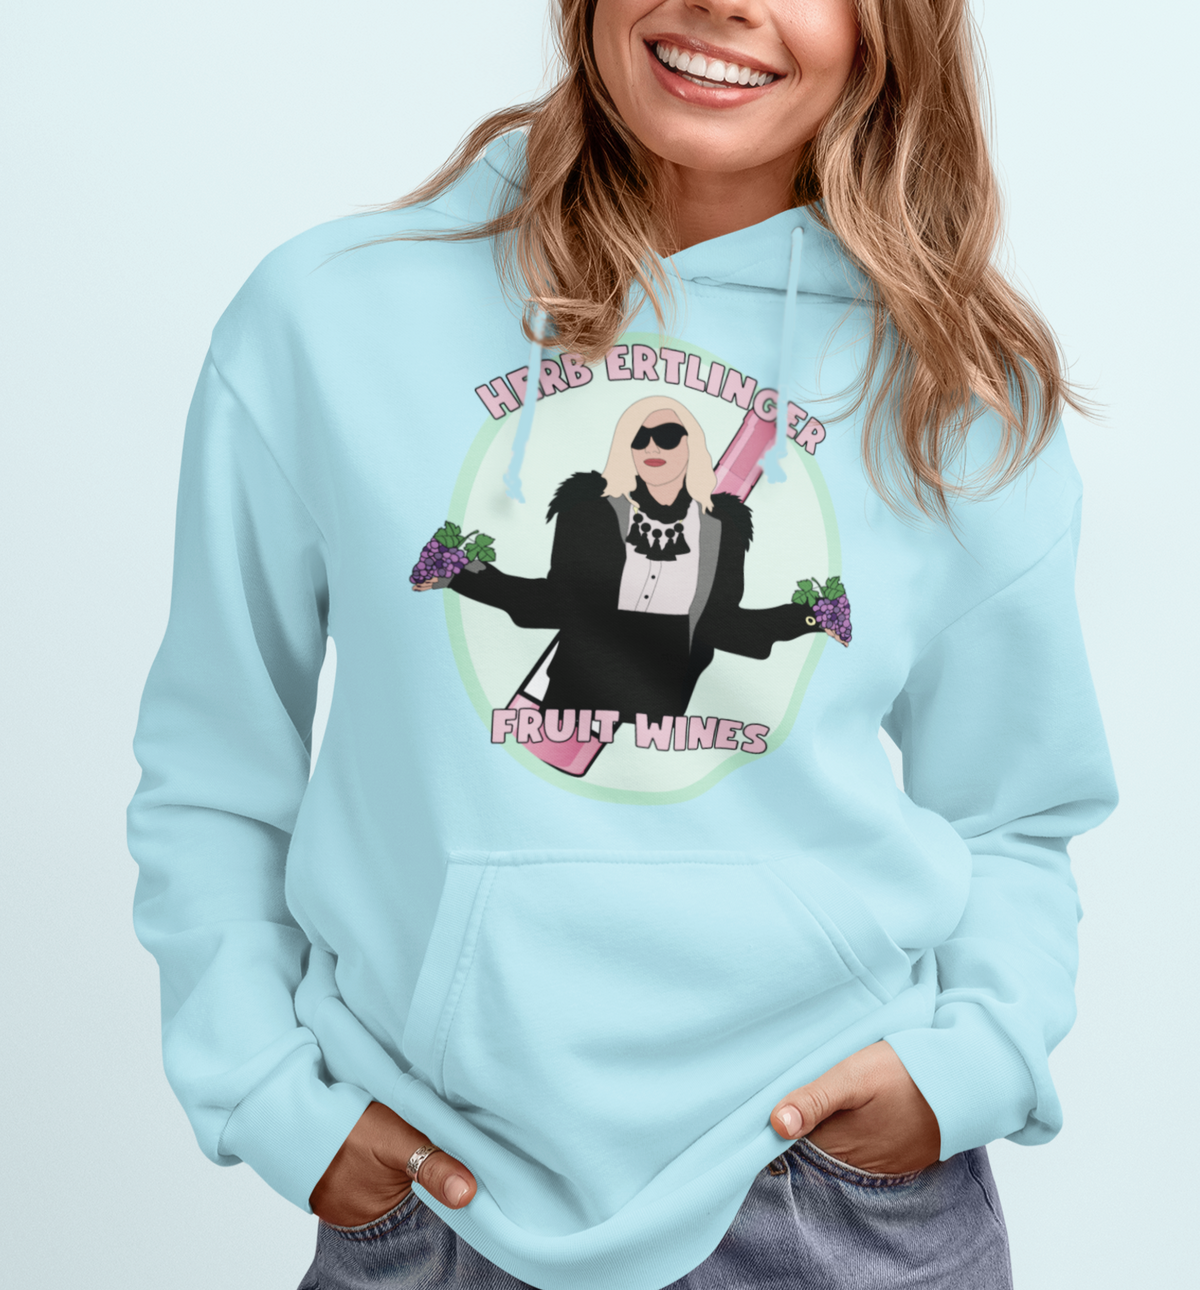 Light blue hoodie with moire rose and a bottle of wine saying herb ertlinger fruit wines - HighCiti